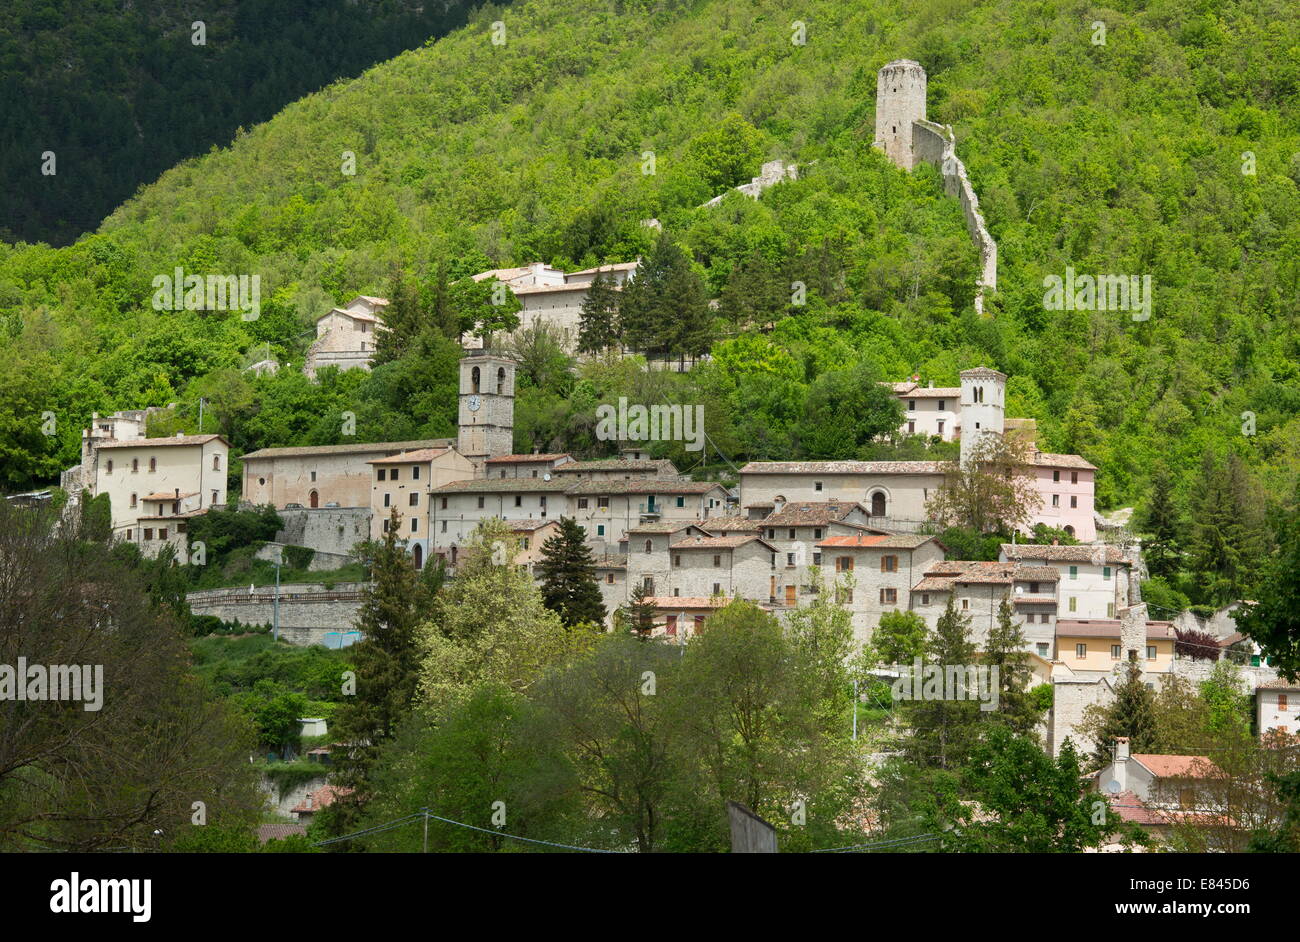 The small town of Castelsantangelo in the Monti Sibillini National Park, Apennines,  Italy. Stock Photo